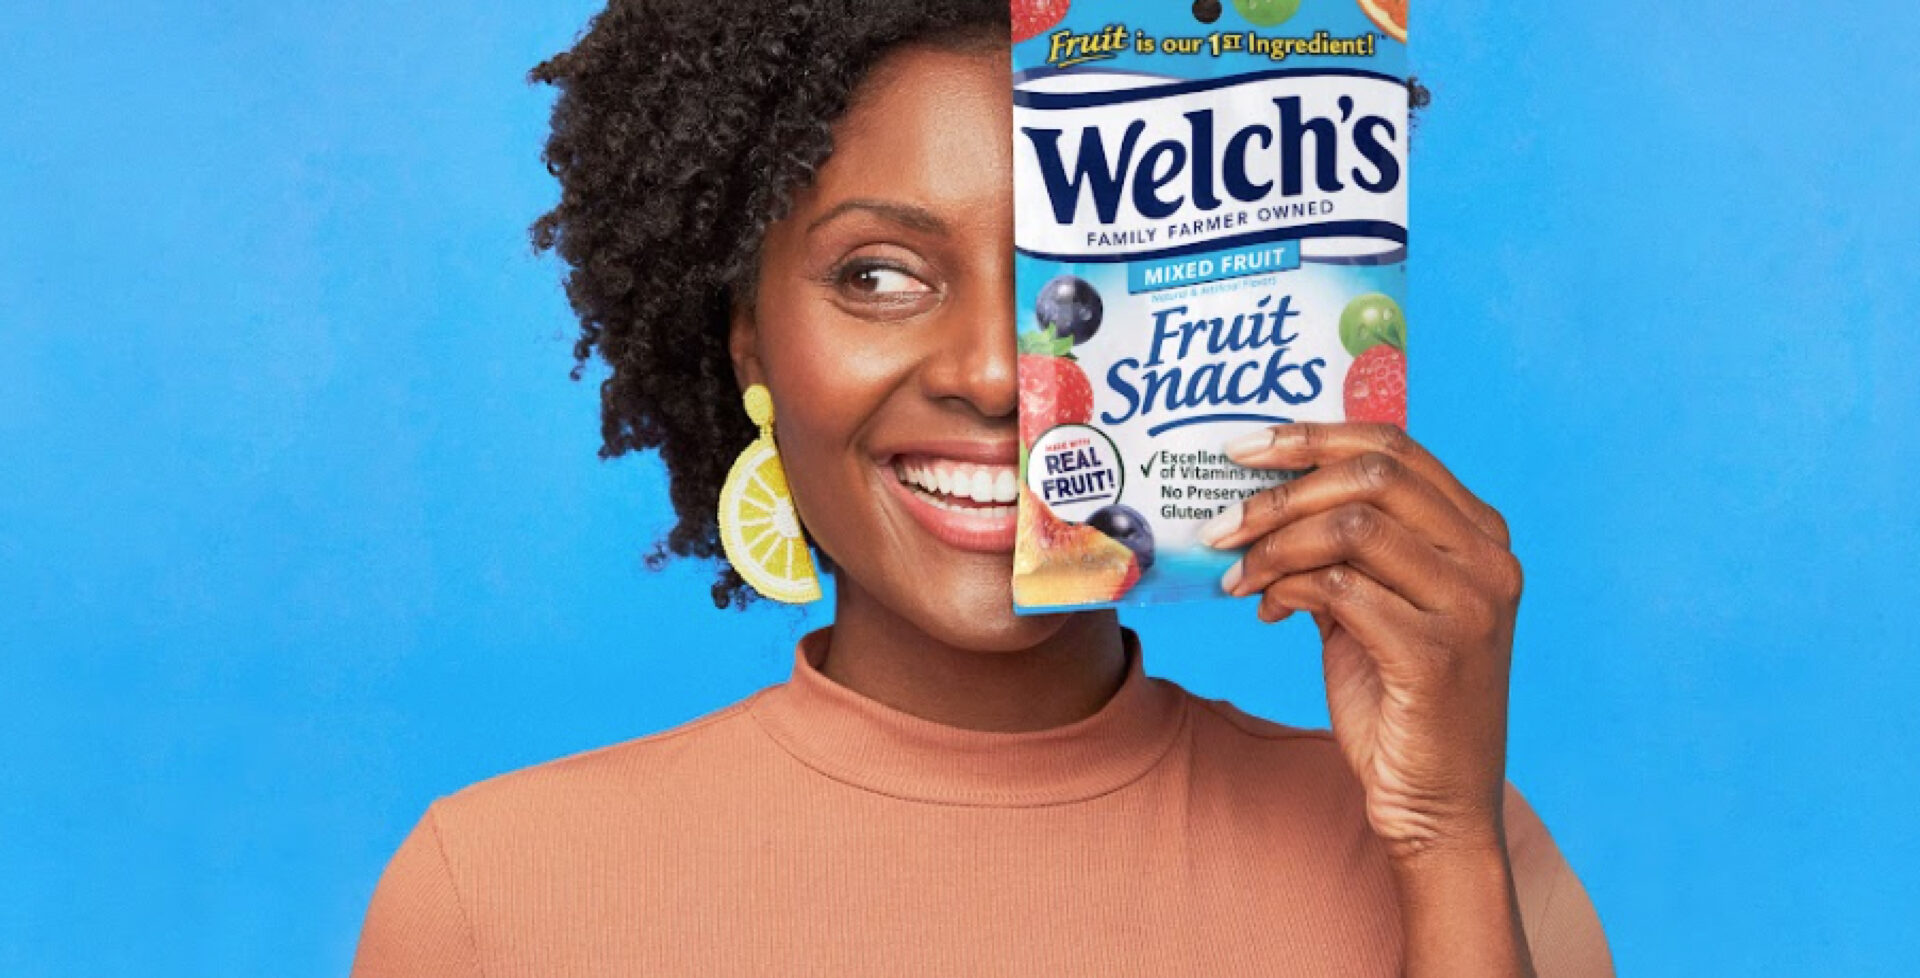 Woman smiling while holding a bag of Welch's fruit snacks in front of her face